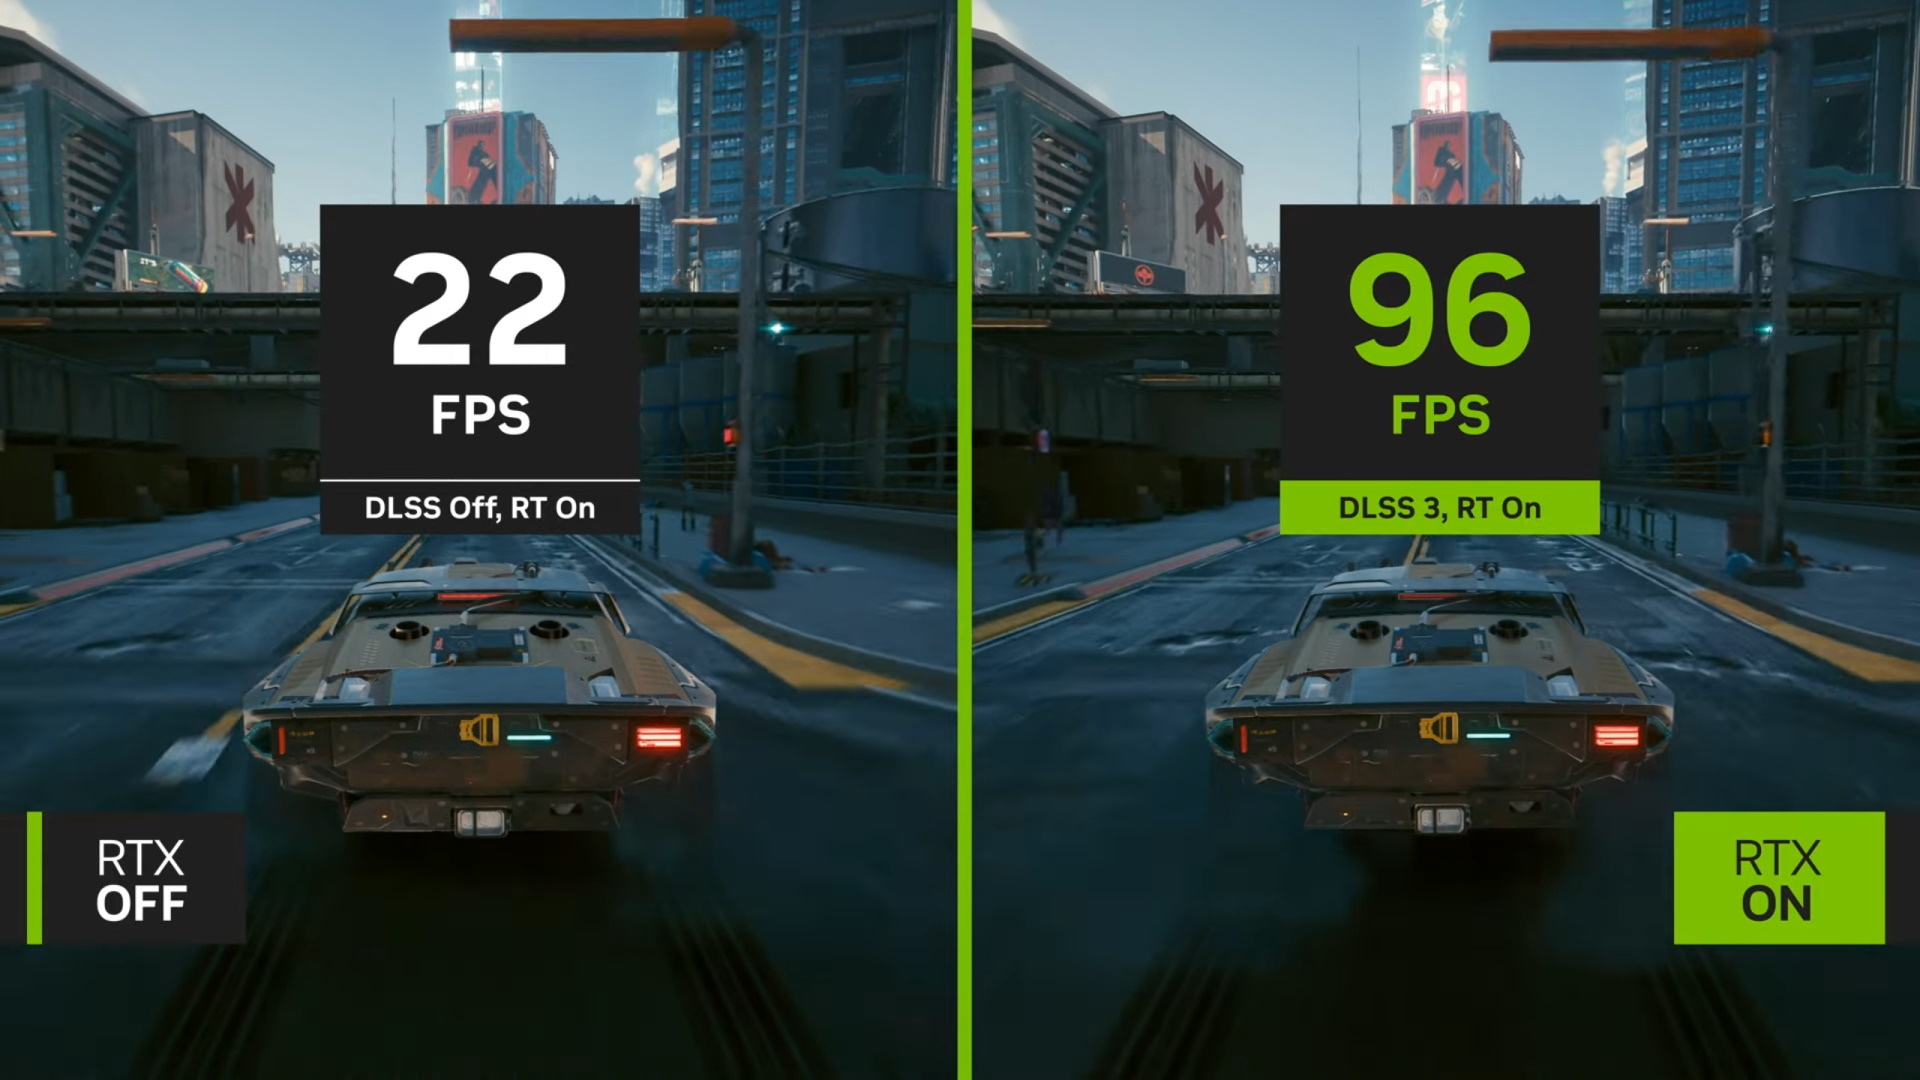  Nvidia's frame generation works with AMD FSR and Intel XeSS 